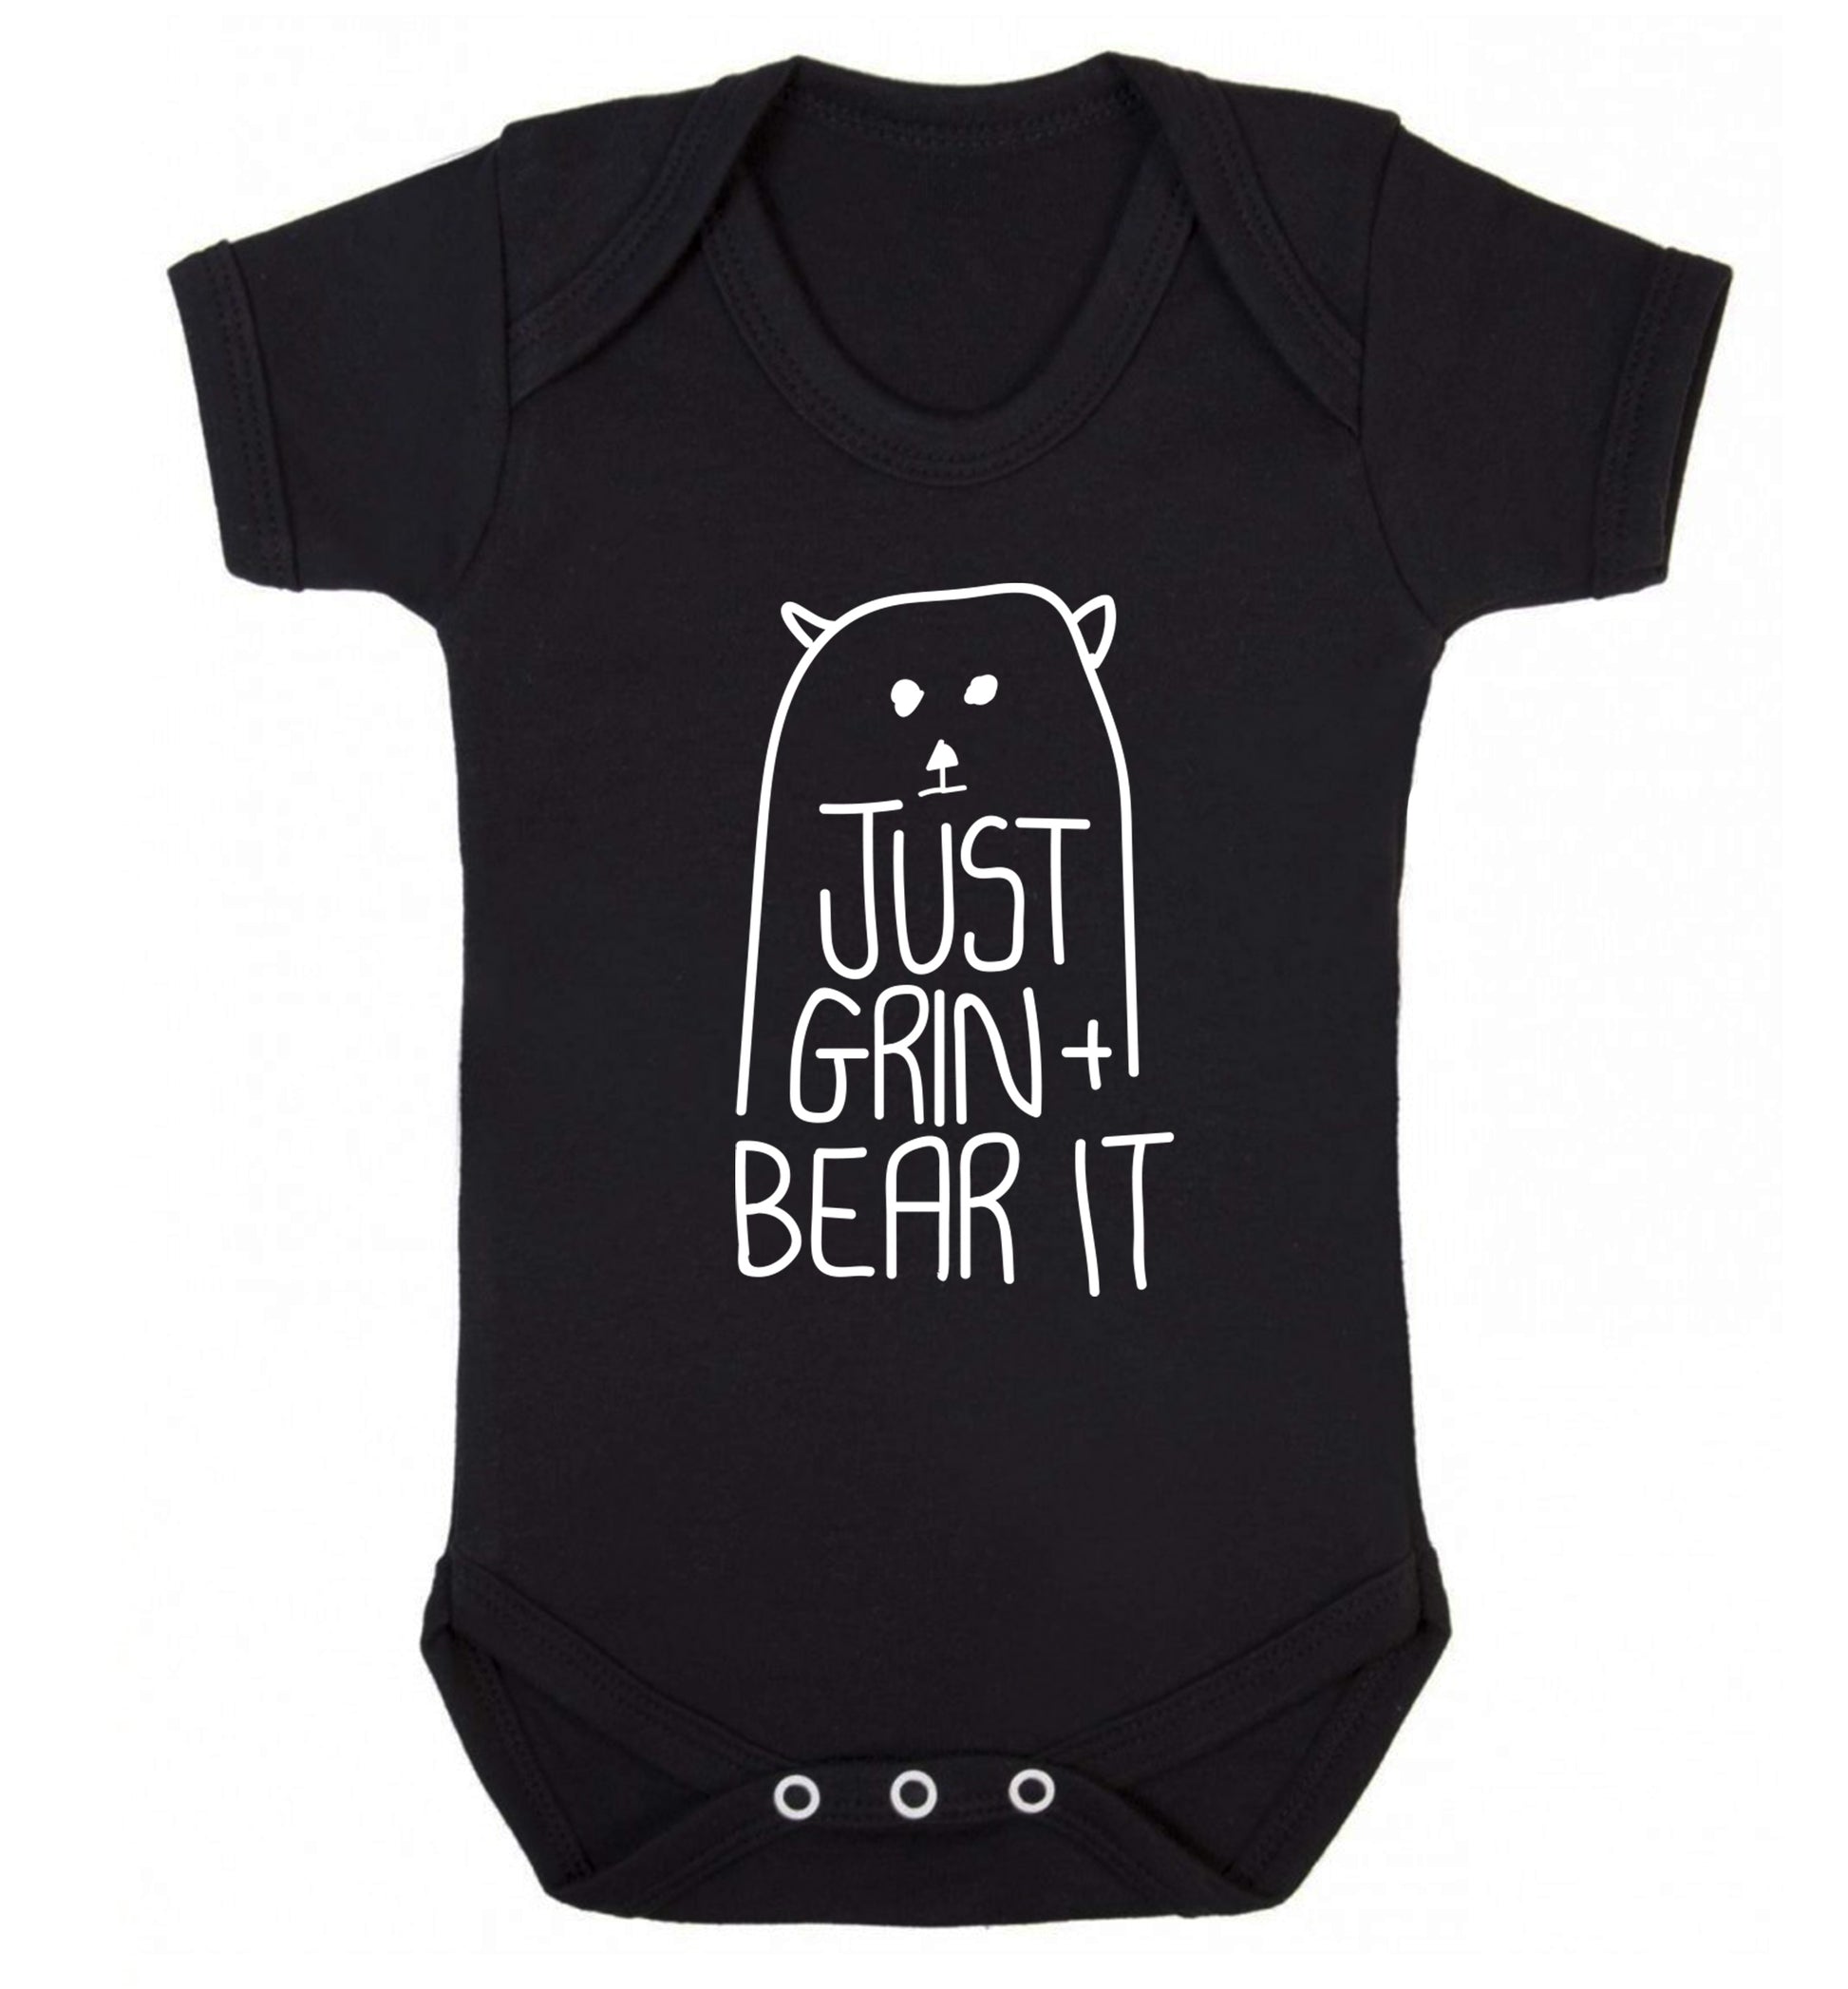 Just grin and bear it Baby Vest black 18-24 months